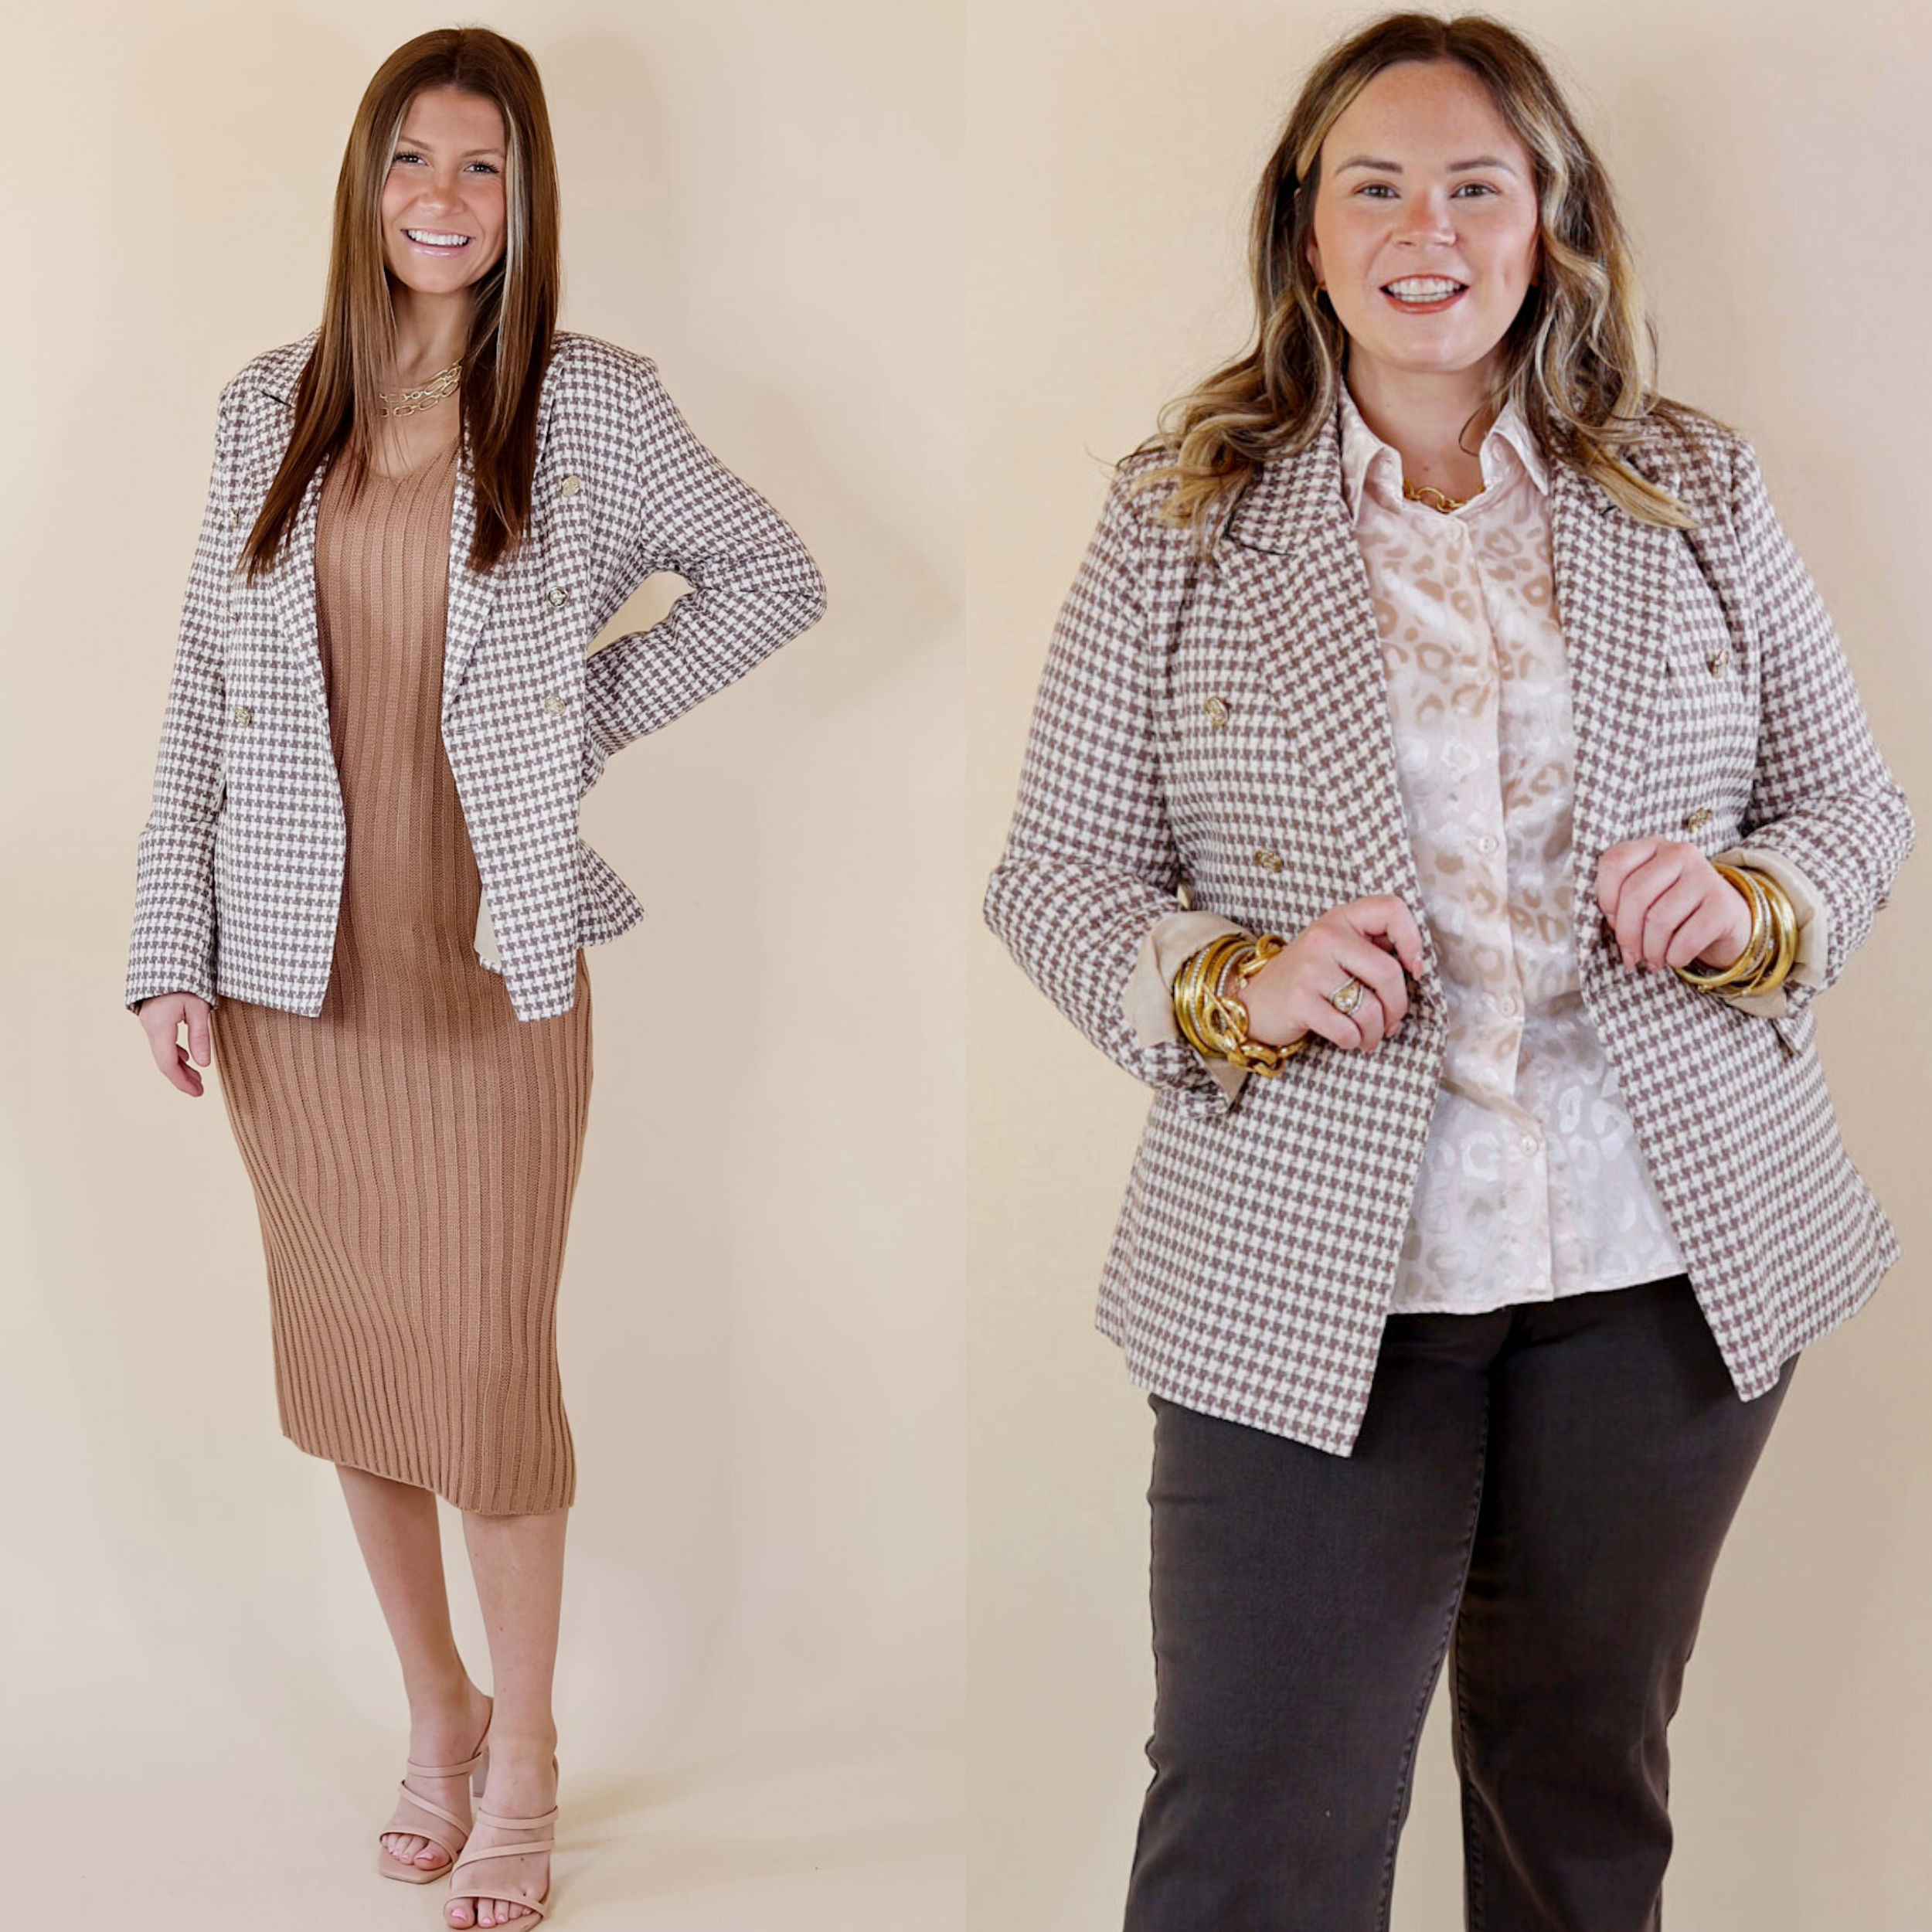 In the picture the model is wearing a light taupe blazer with a white background